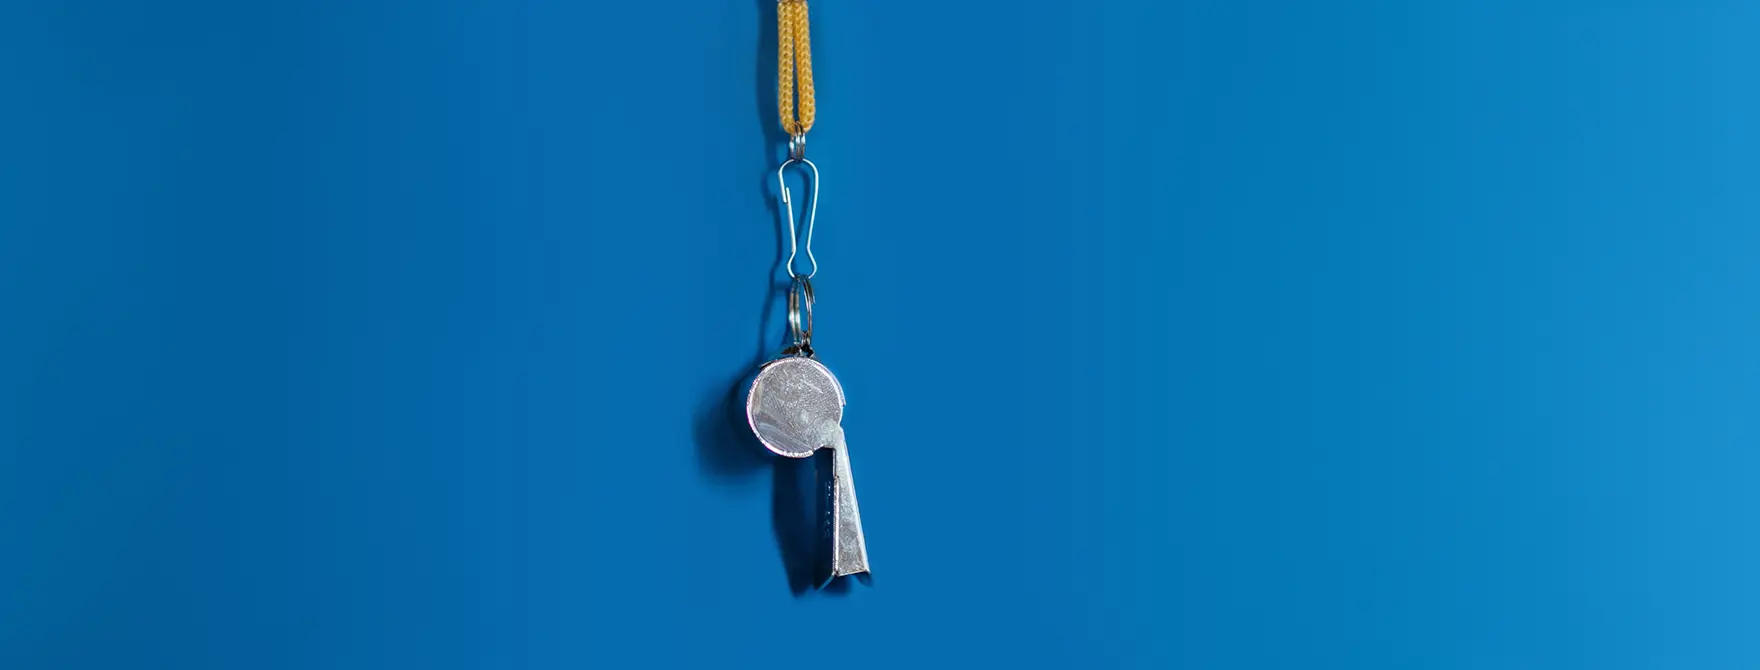 A silver whistle hanging on a yellow string in front of a blue background